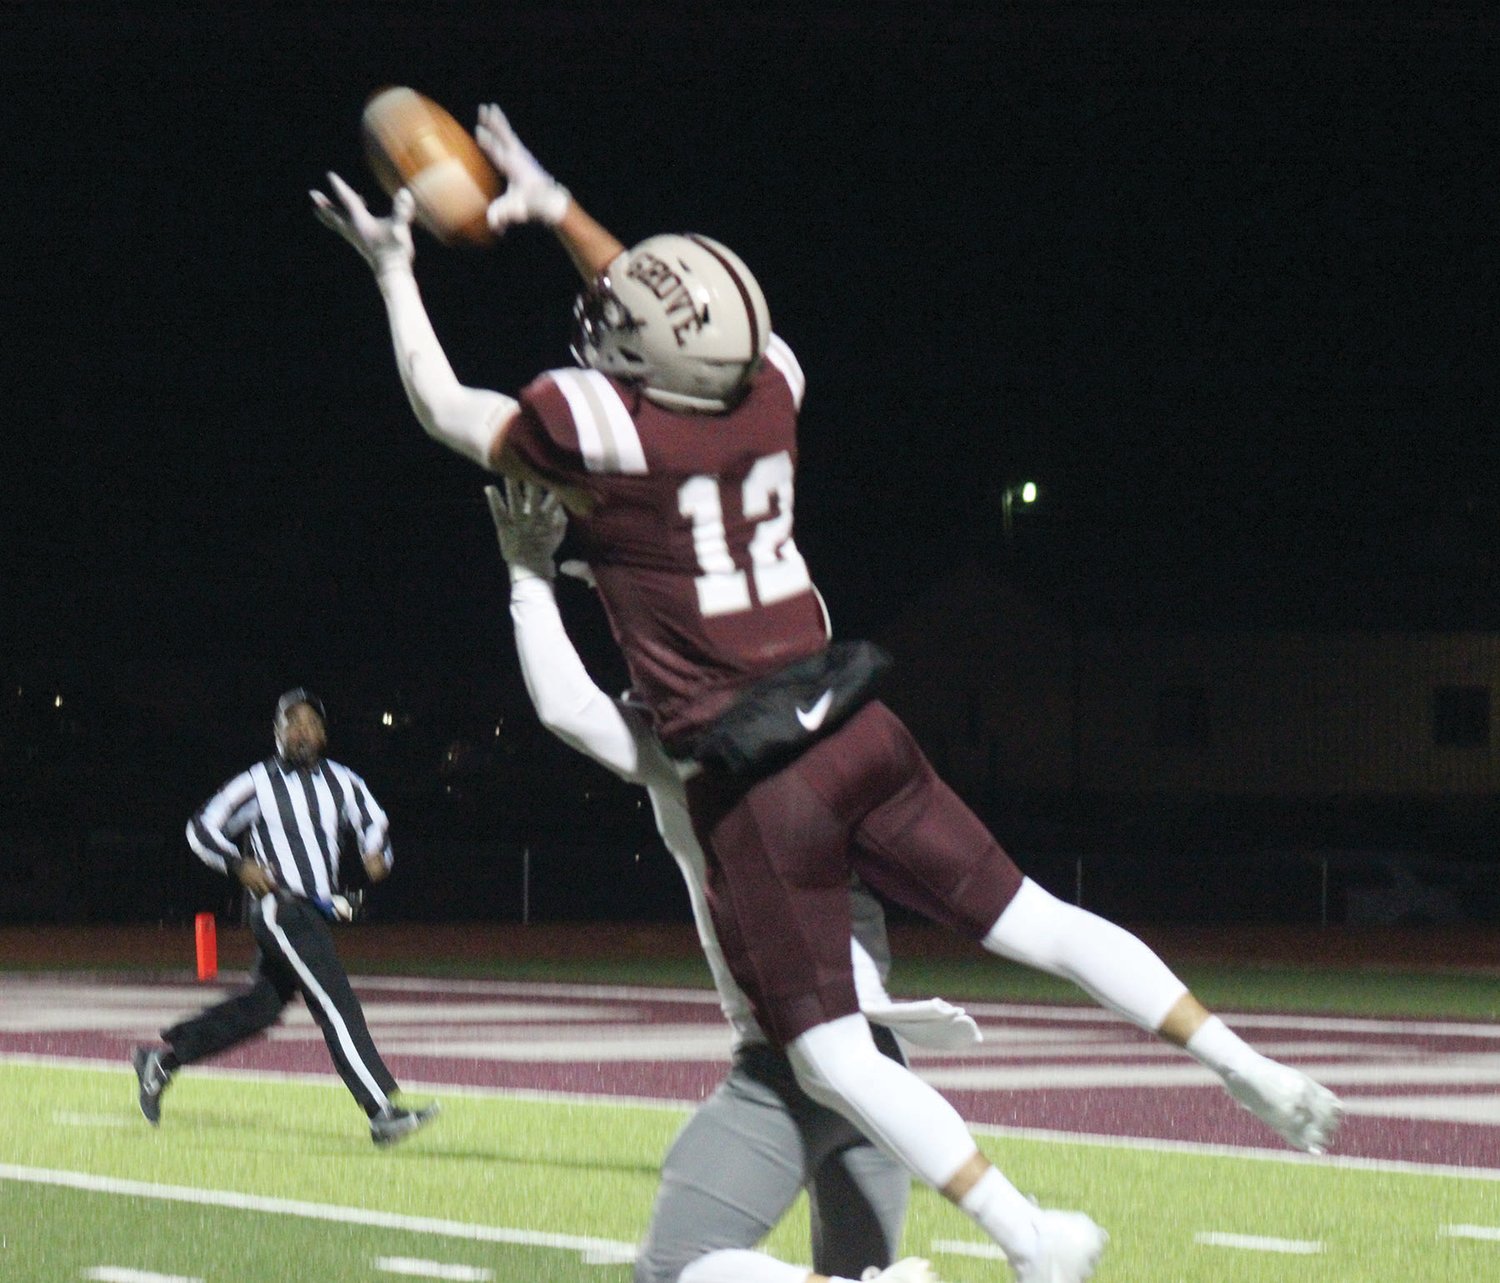 Mountain Grove’s Jace Dowden goes up and over a Reeds Spring defender on a fourth down pass to make a catch and eventually scores a touchdown.